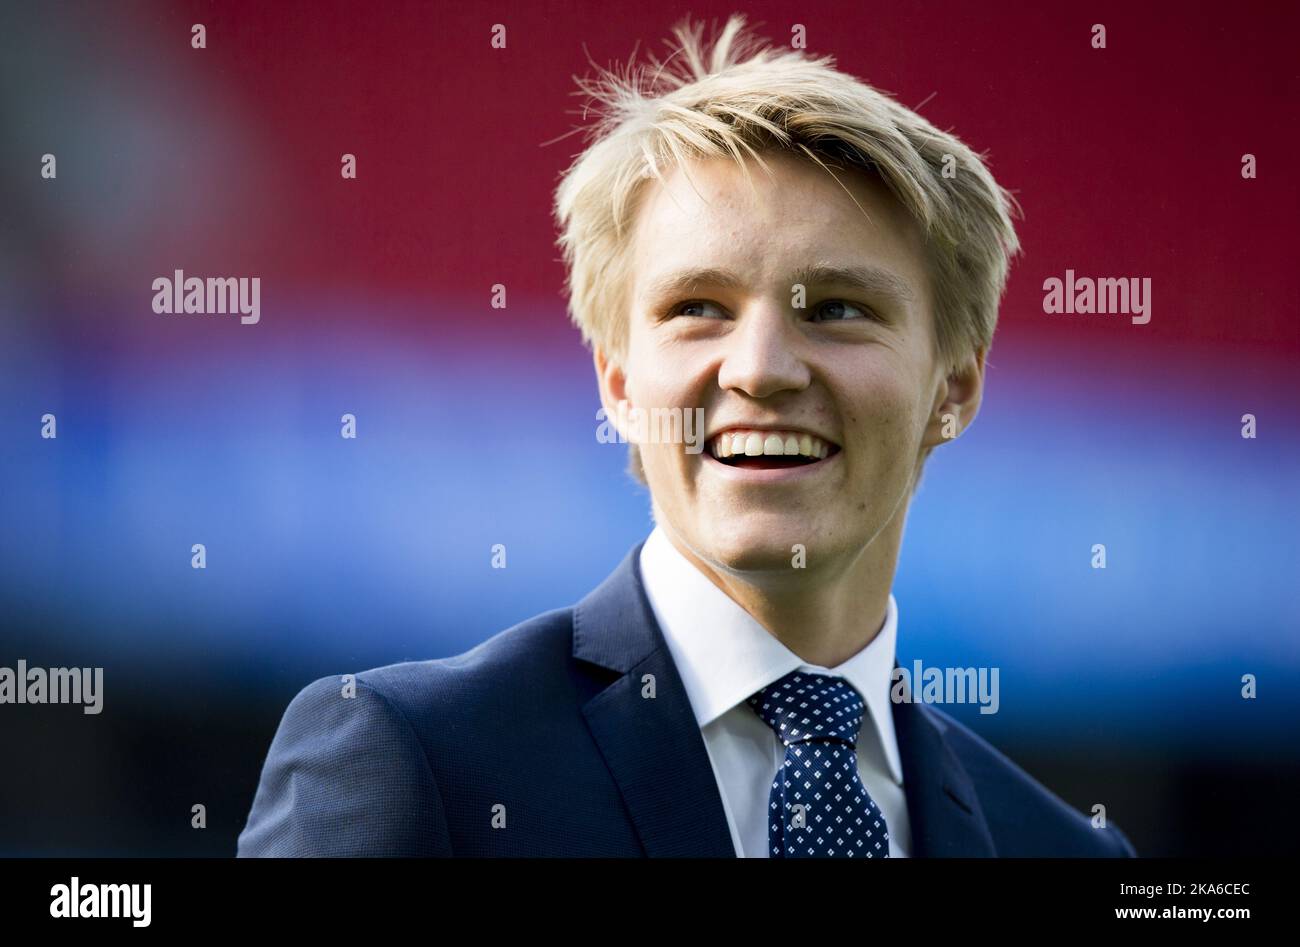 Oslo, Norway 20150608. Soccerplayer Martin Oedegaard before private footbal lmatch between Norway and Sweden at Ullevaal Stadium on Monday night. Photo: Vegard Wivestad Groett / NTB scanpix Stock Photo